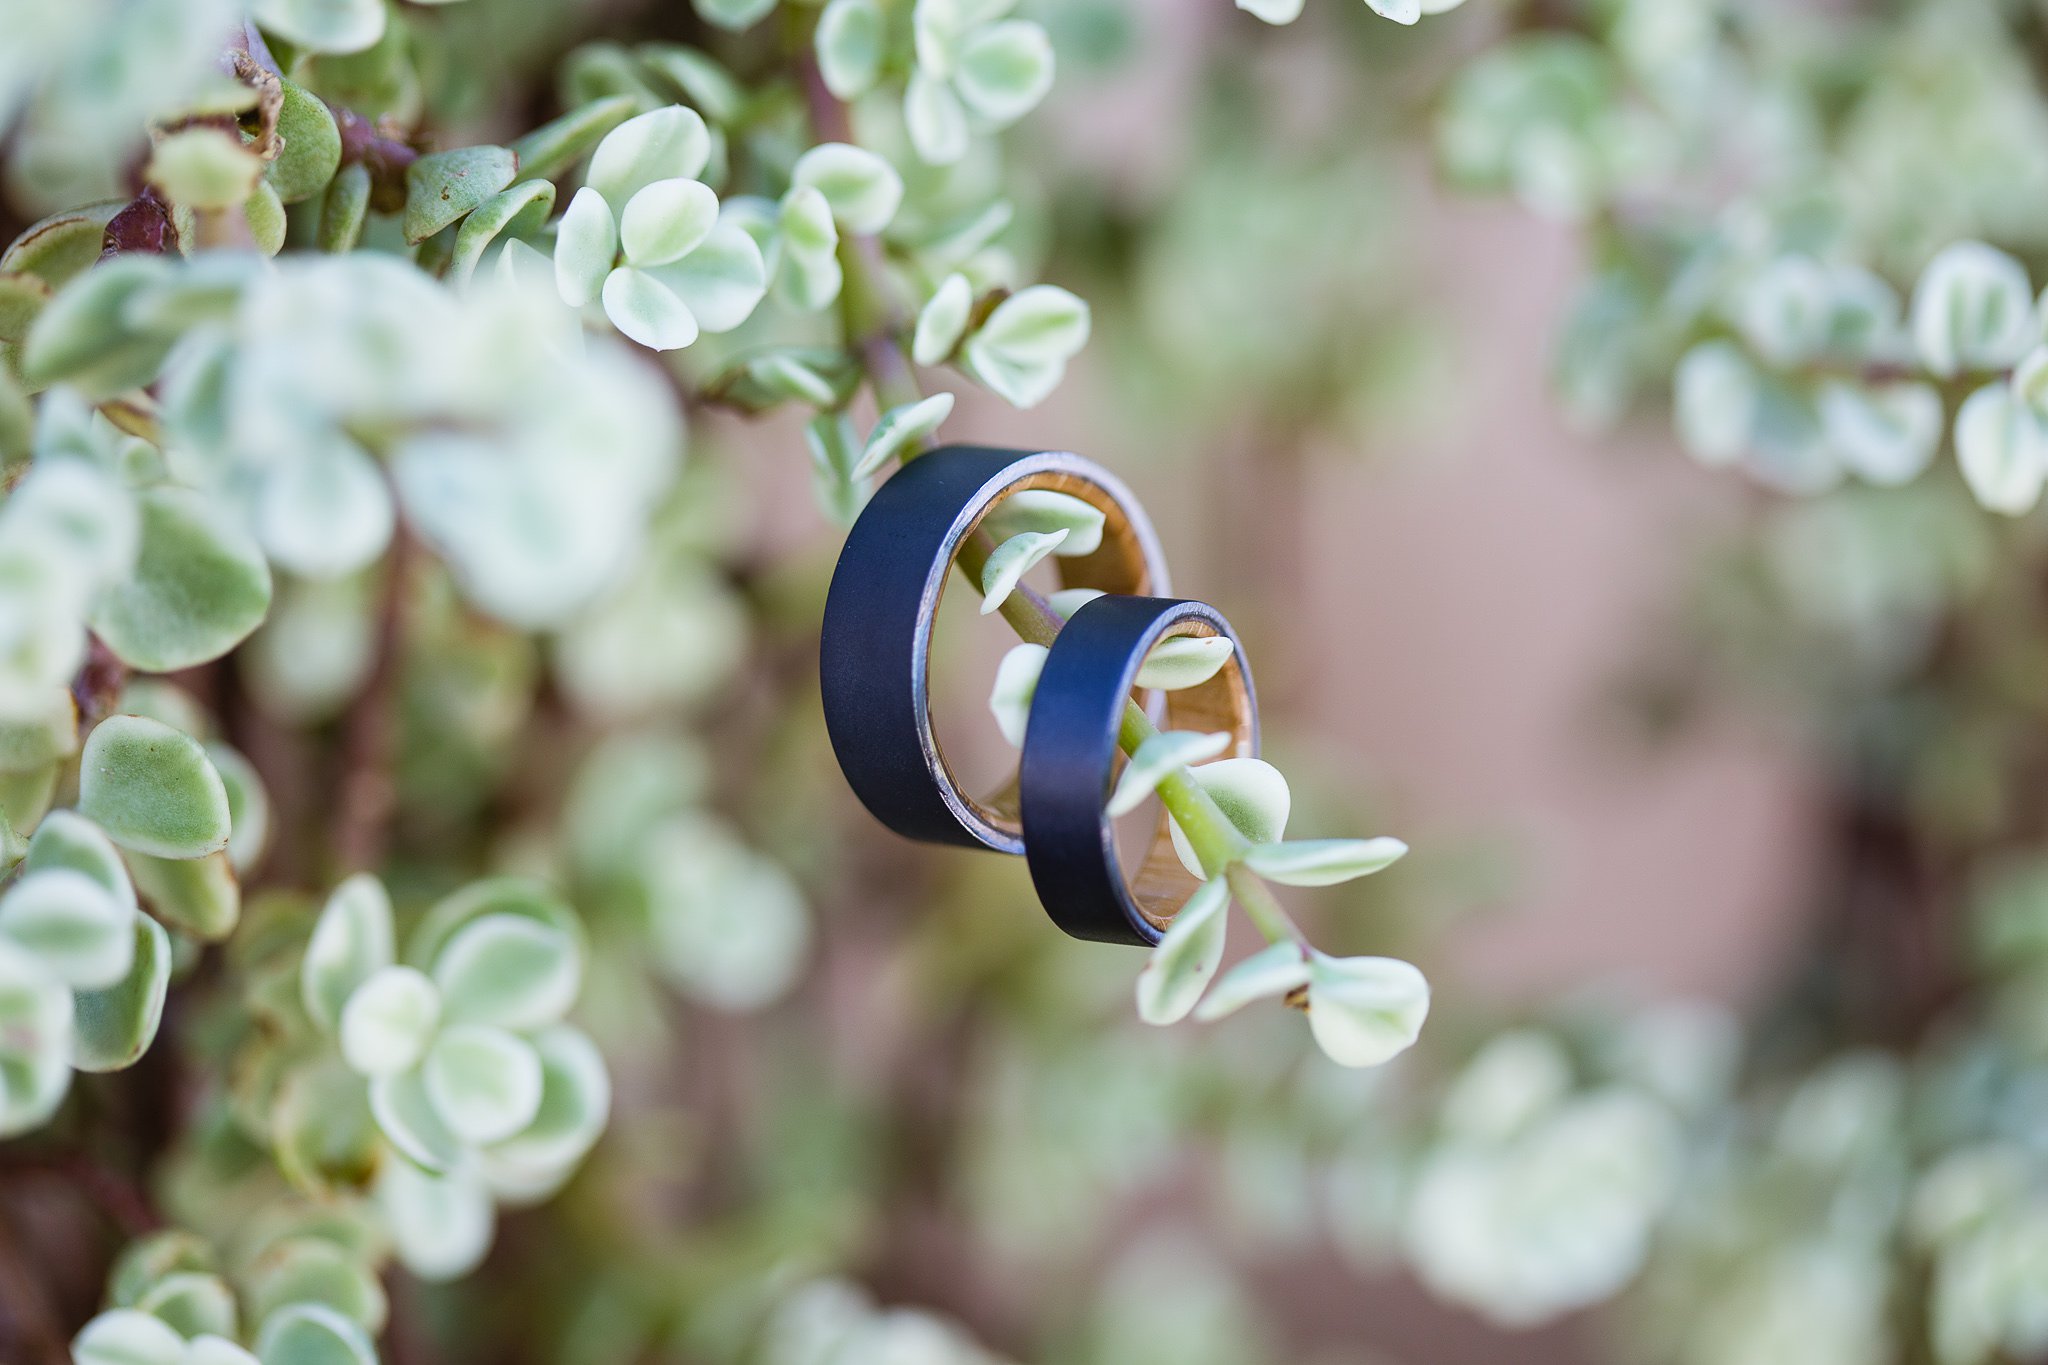 Granite and wood alternative wedding bands on succulent plant in garden by Arizona wedding photographers PMA Photography.